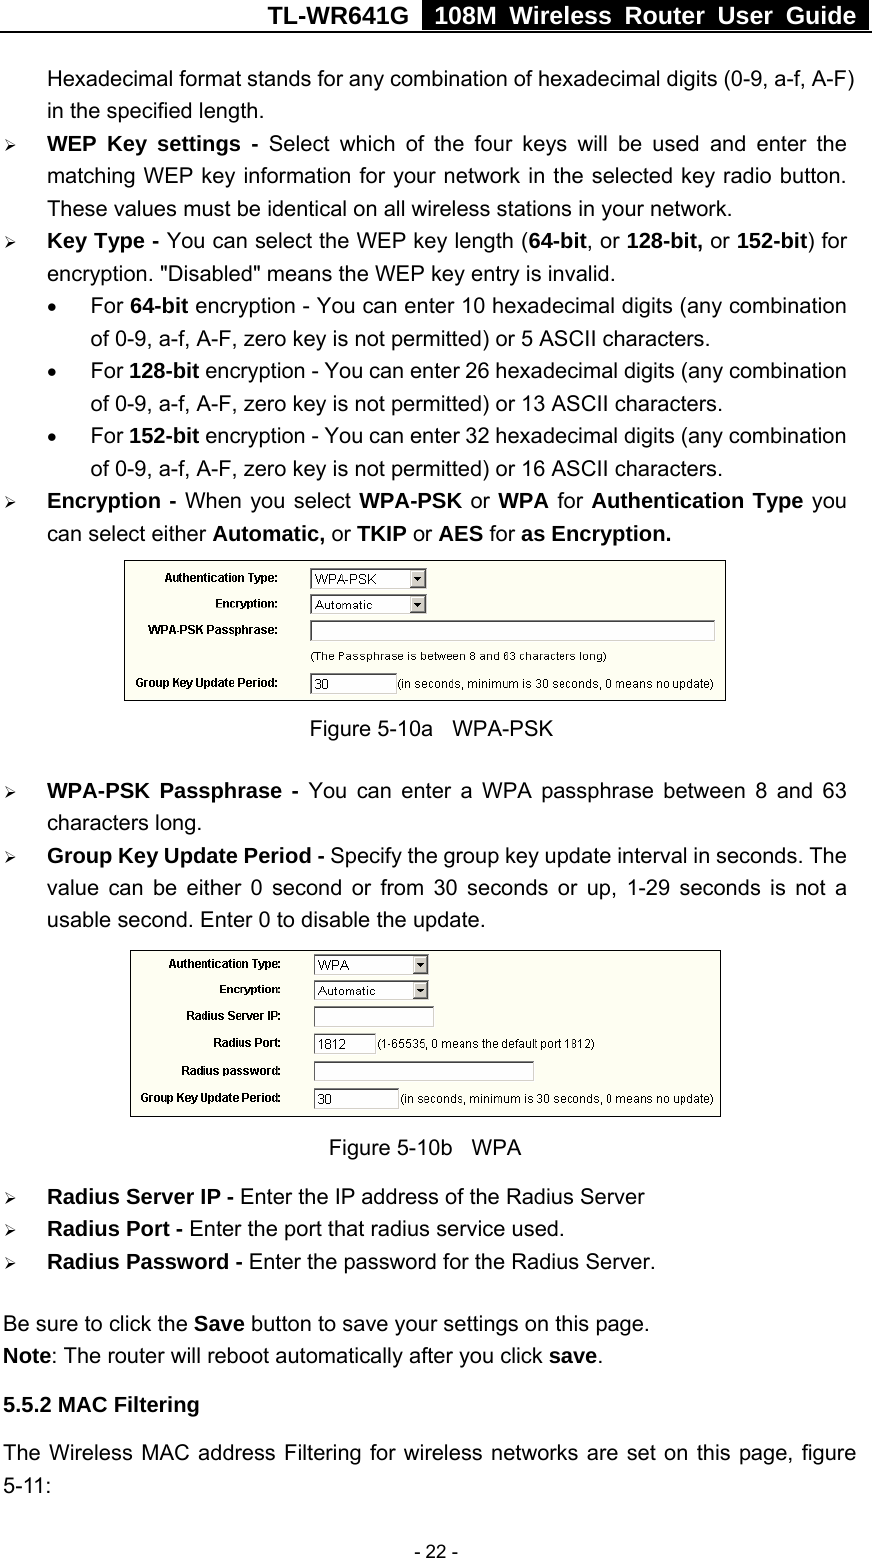 TL-WR641G   108M Wireless Router User Guide   - 22 -Hexadecimal format stands for any combination of hexadecimal digits (0-9, a-f, A-F) in the specified length. ¾ WEP Key settings - Select which of the four keys will be used and enter the matching WEP key information for your network in the selected key radio button. These values must be identical on all wireless stations in your network. ¾ Key Type - You can select the WEP key length (64-bit, or 128-bit, or 152-bit) for encryption. &quot;Disabled&quot; means the WEP key entry is invalid. • For 64-bit encryption - You can enter 10 hexadecimal digits (any combination of 0-9, a-f, A-F, zero key is not permitted) or 5 ASCII characters.   • For 128-bit encryption - You can enter 26 hexadecimal digits (any combination of 0-9, a-f, A-F, zero key is not permitted) or 13 ASCII characters. • For 152-bit encryption - You can enter 32 hexadecimal digits (any combination of 0-9, a-f, A-F, zero key is not permitted) or 16 ASCII characters. ¾ Encryption - When you select WPA-PSK or WPA for Authentication Type you can select either Automatic, or TKIP or AES for as Encryption.  Figure 5-10a  WPA-PSK ¾ WPA-PSK Passphrase - You can enter a WPA passphrase between 8 and 63 characters long. ¾ Group Key Update Period - Specify the group key update interval in seconds. The value can be either 0 second or from 30 seconds or up, 1-29 seconds is not a usable second. Enter 0 to disable the update.  Figure 5-10b  WPA ¾ Radius Server IP - Enter the IP address of the Radius Server ¾ Radius Port - Enter the port that radius service used. ¾ Radius Password - Enter the password for the Radius Server. Be sure to click the Save button to save your settings on this page. Note: The router will reboot automatically after you click save. 5.5.2 MAC Filtering   The Wireless MAC address Filtering for wireless networks are set on this page, figure 5-11: 